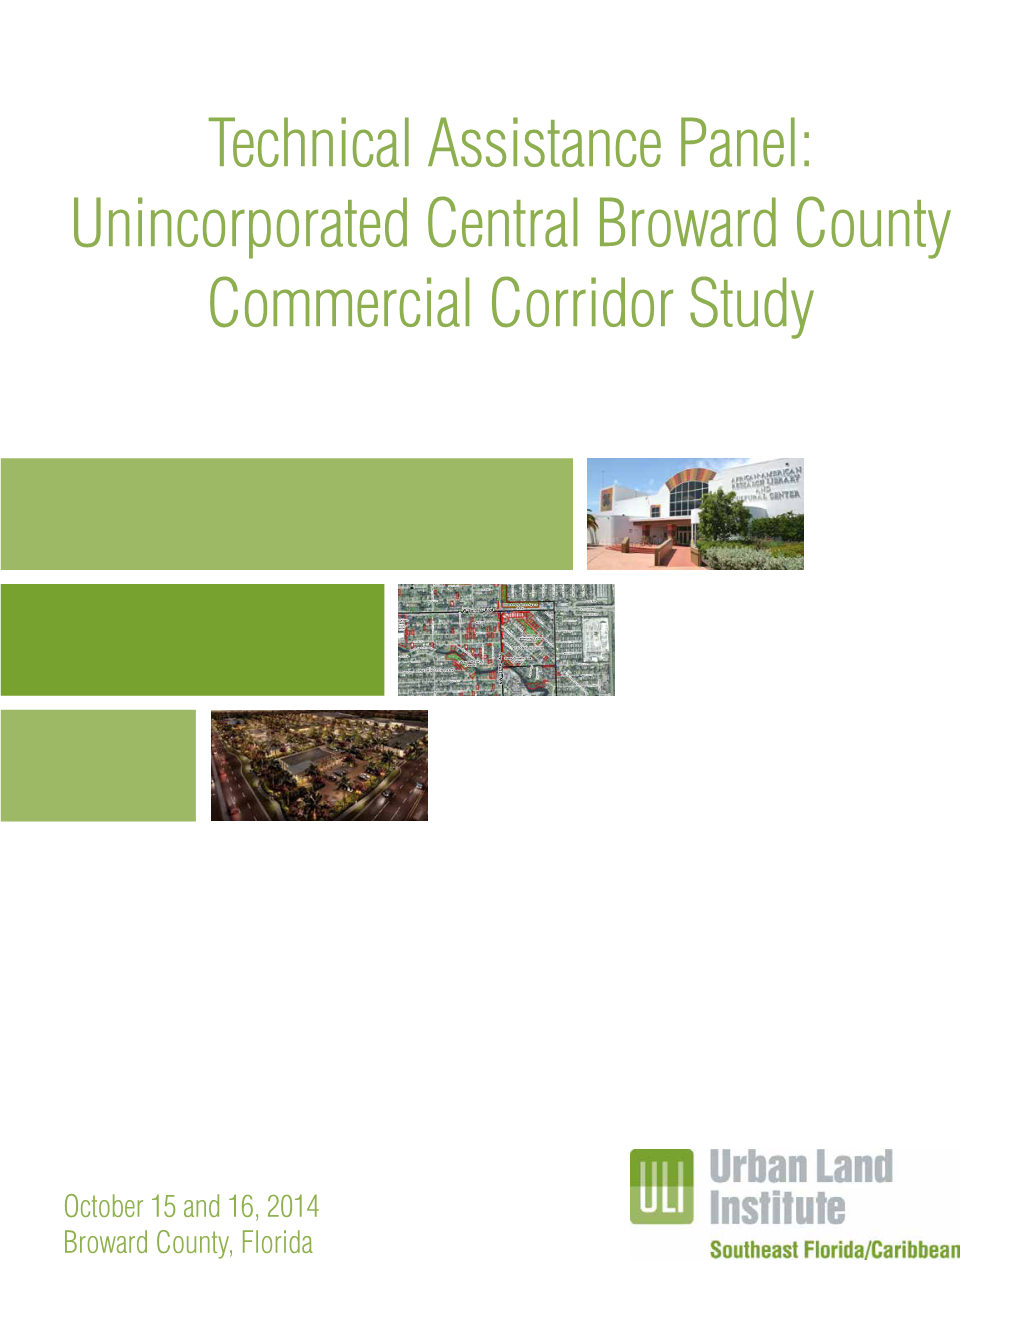 Unincorporated Central Broward County Commercial Corridor Study